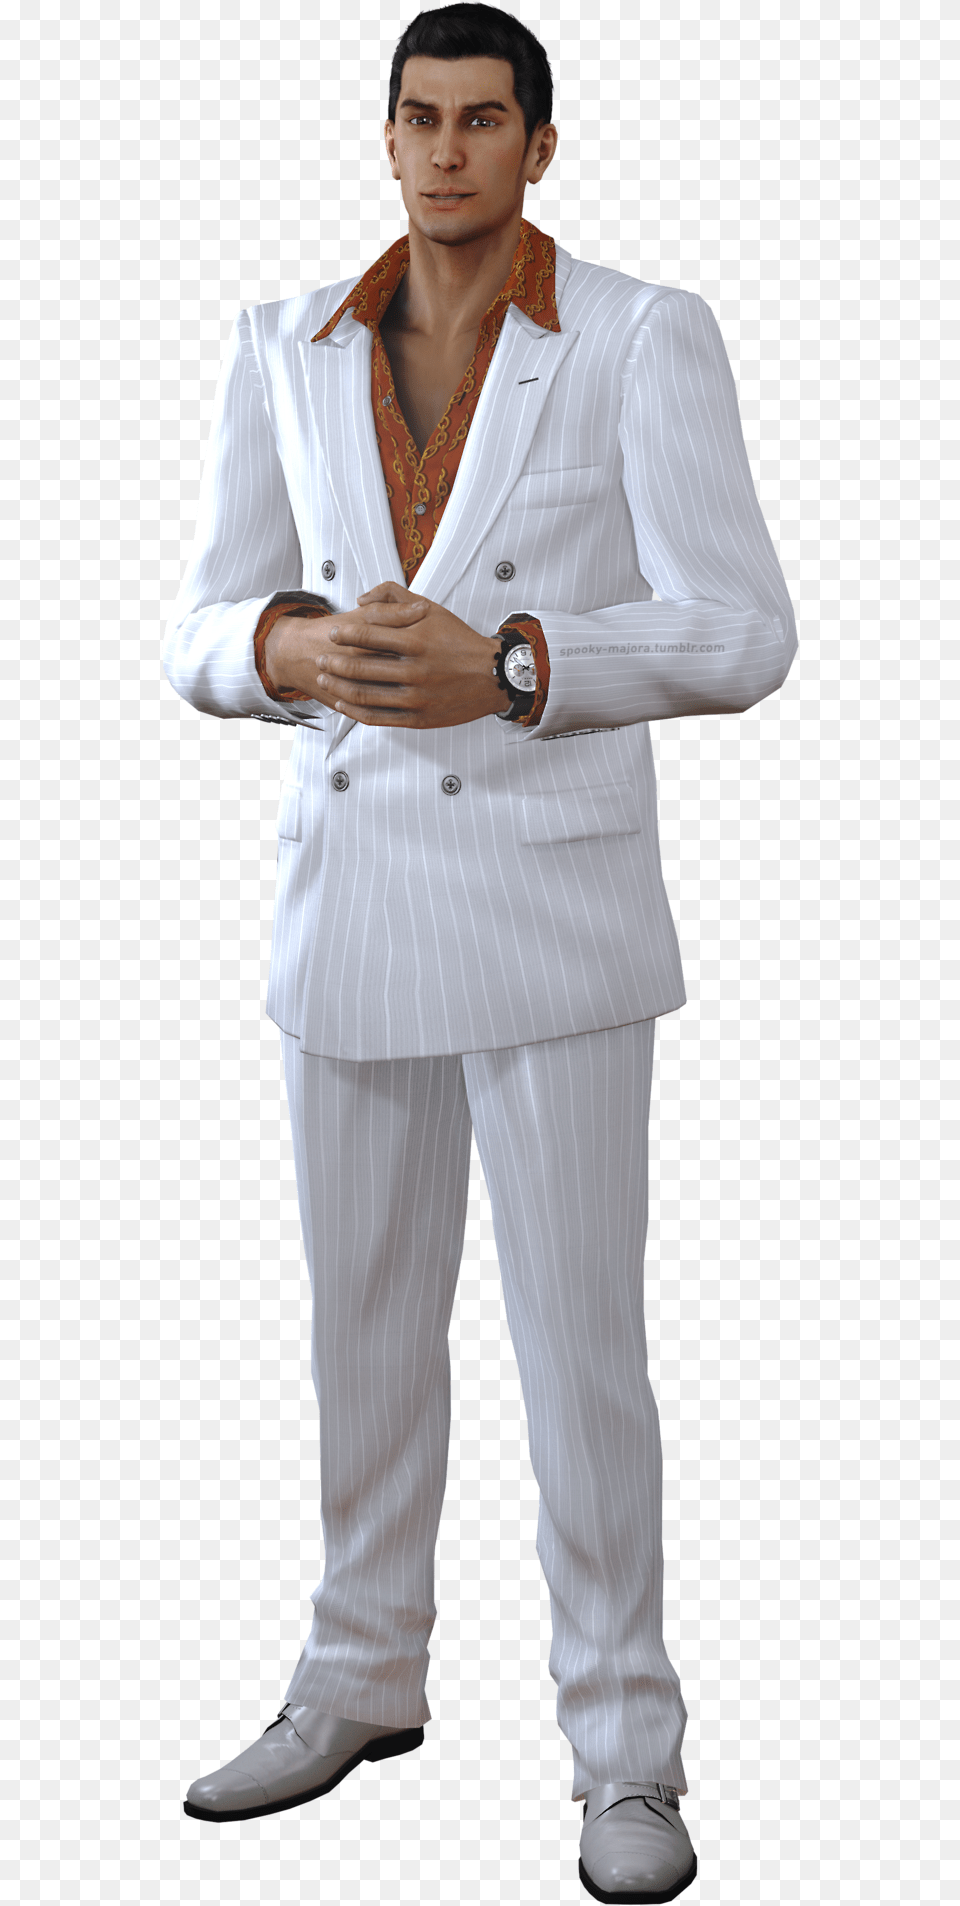 You Know I Had To Do It To Em Had To Do It To Em, Suit, Clothing, Shirt, Formal Wear Png Image